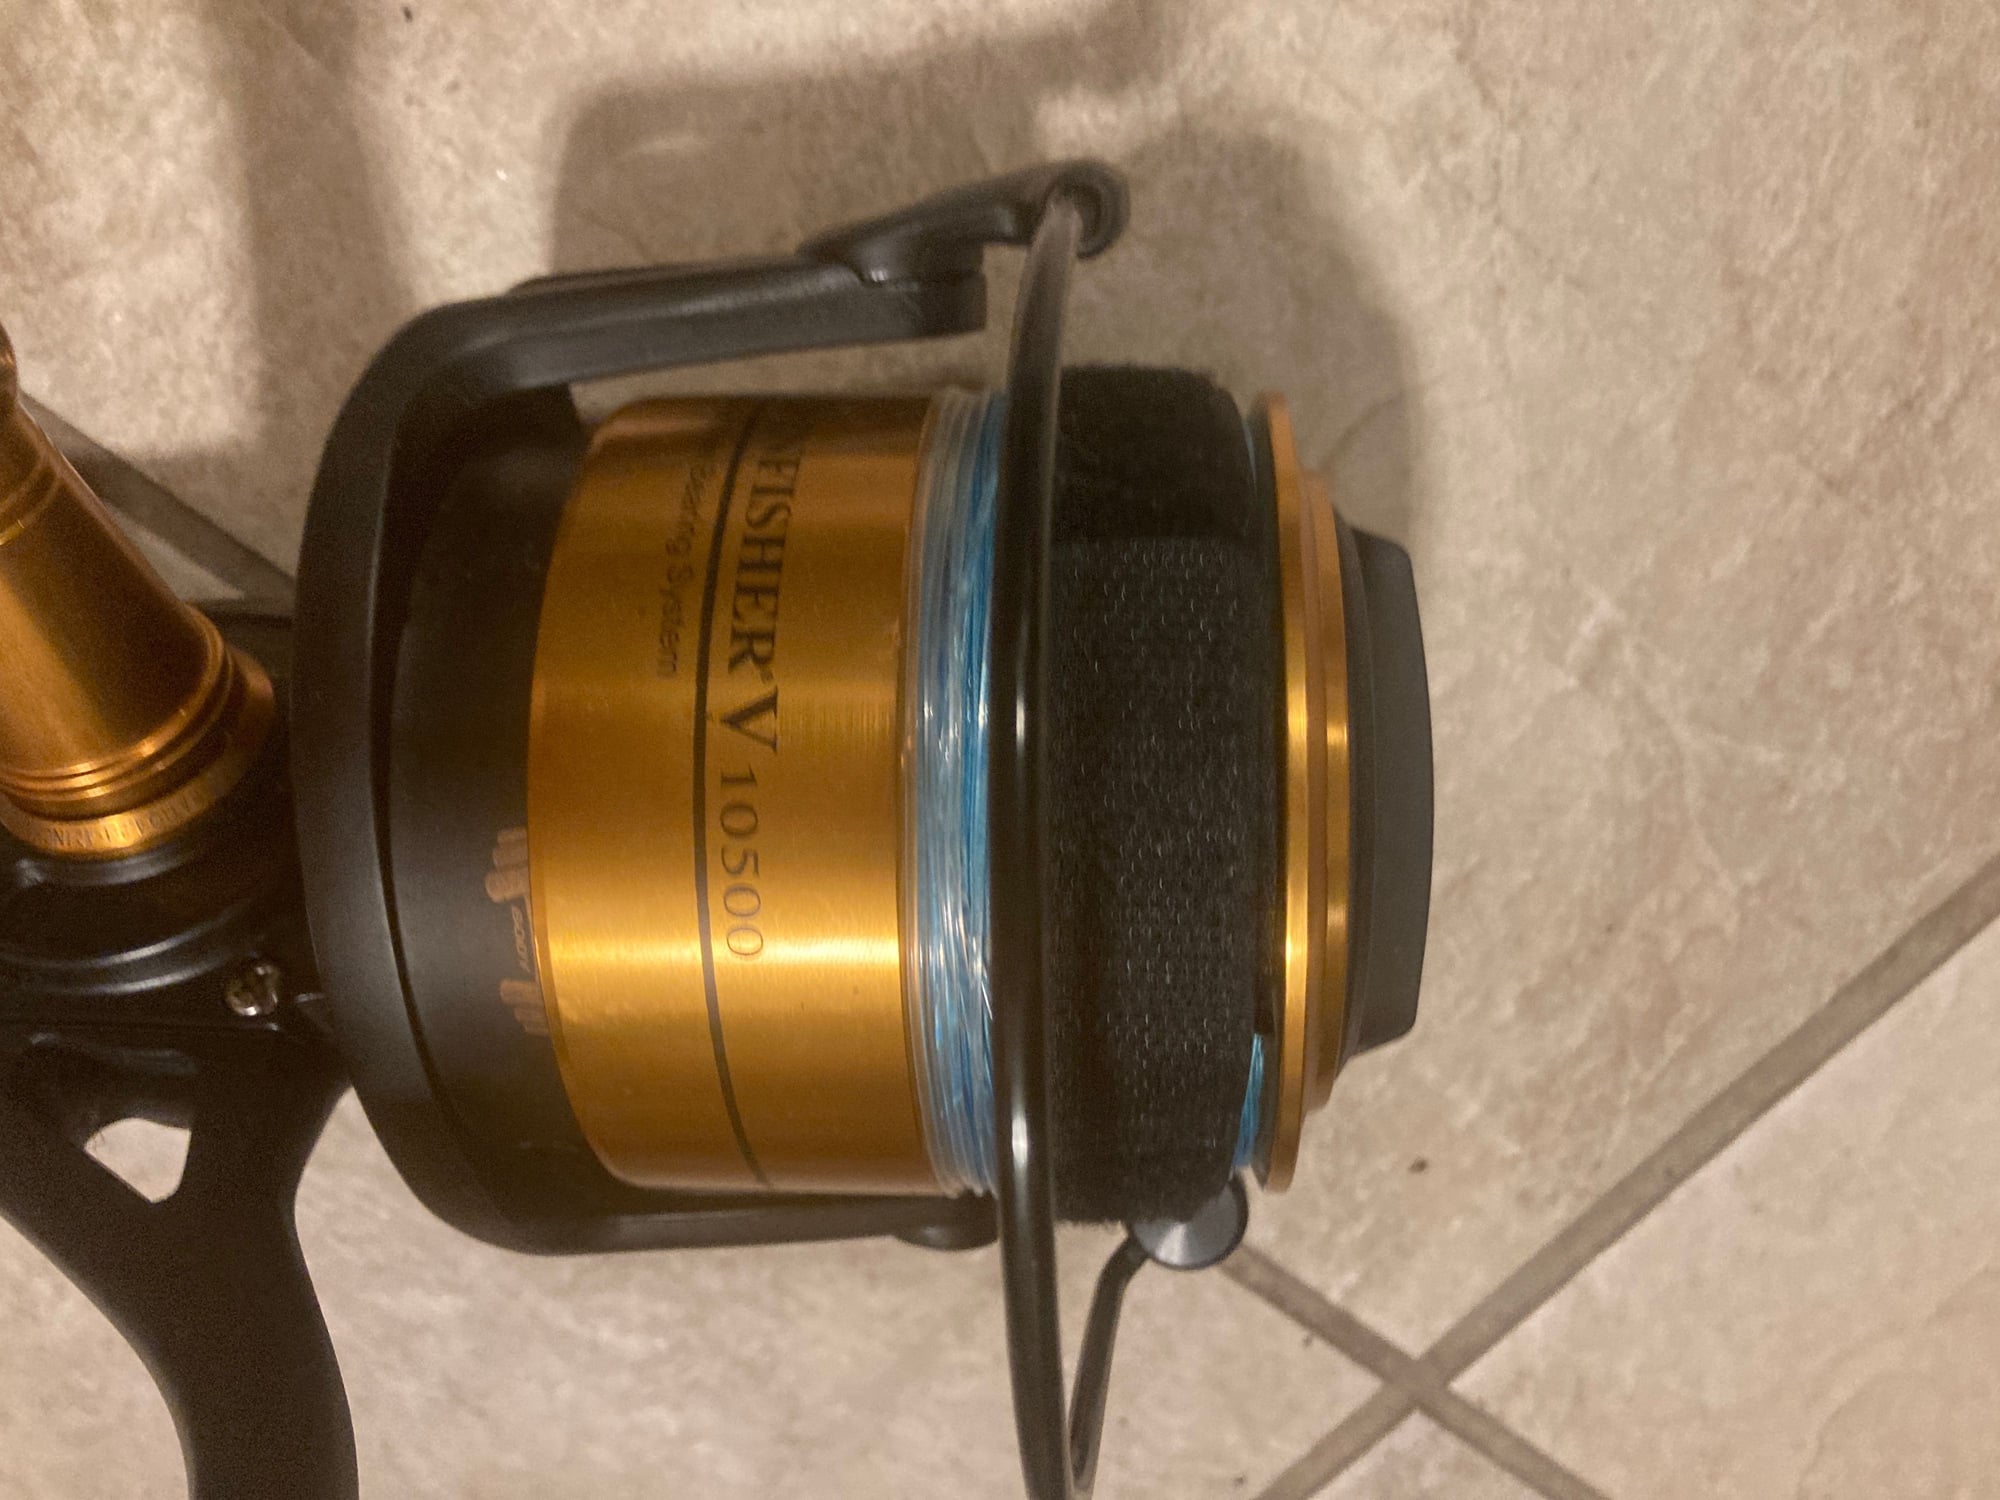 Penn Spinfisher V 10500 Reel - NEW - The Hull Truth - Boating and